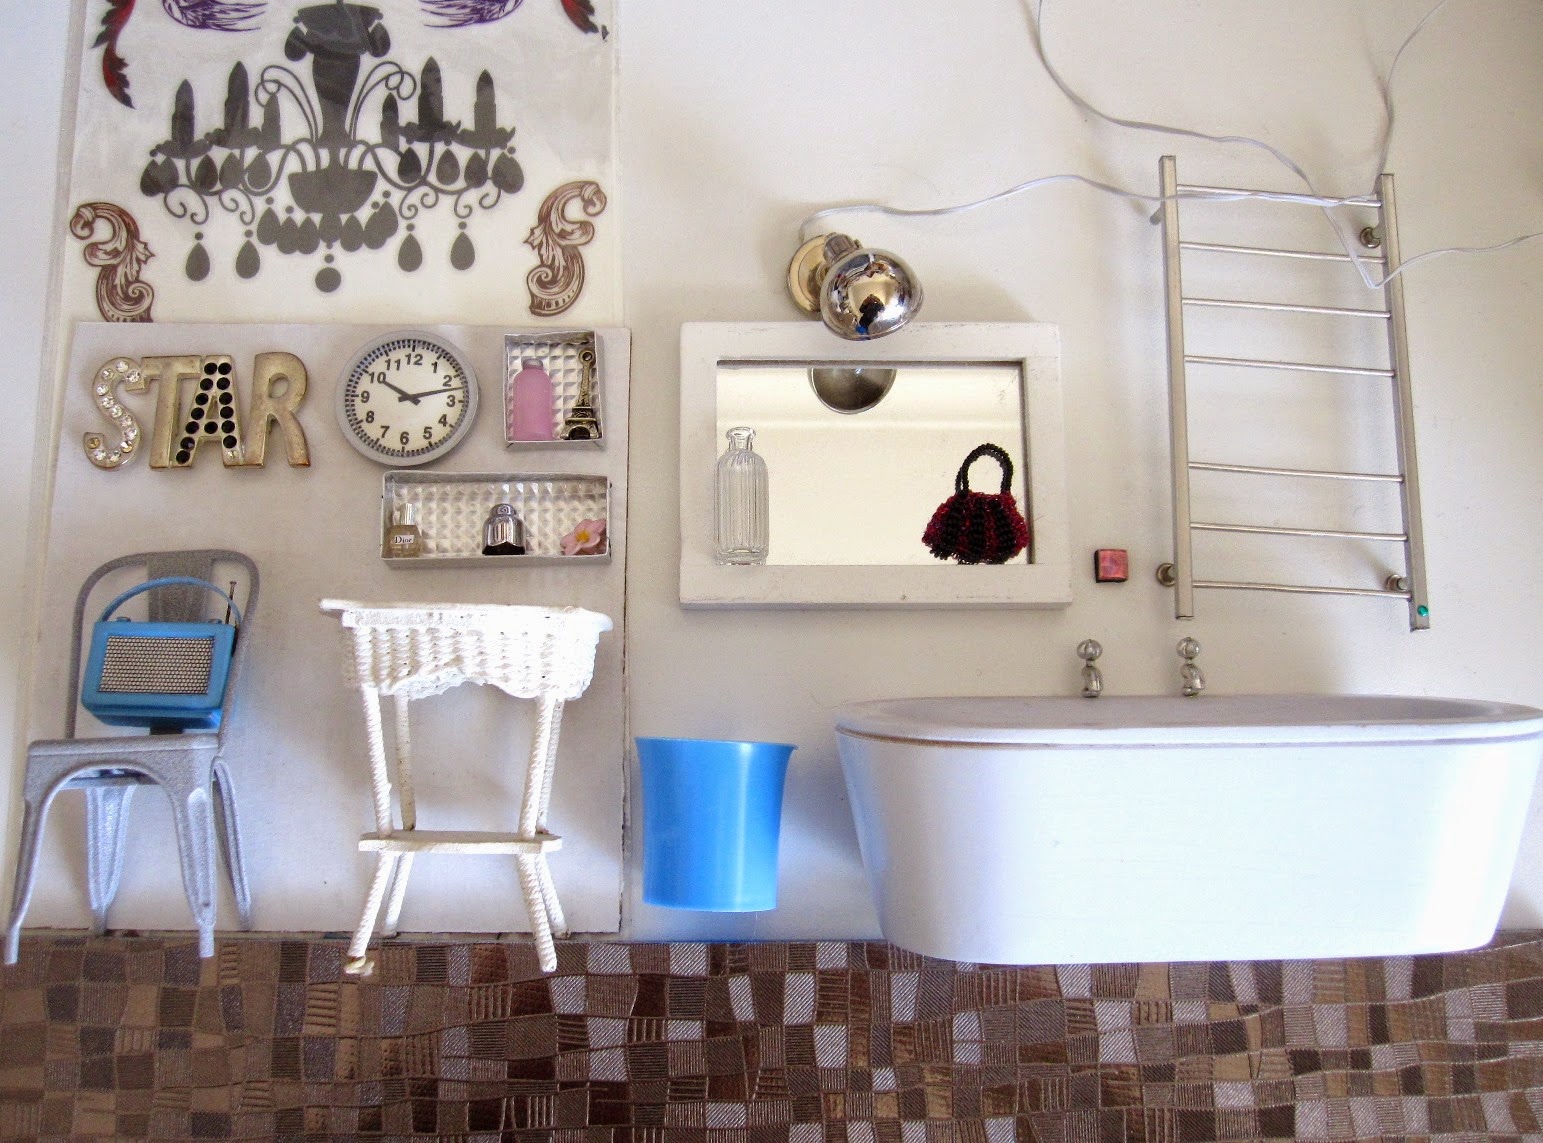 Selection of silver and white dolls house bathroom miniature furniture and accessories, with a full-sized silver-coloured placemat used as flooring and a range of silver, pink, white and blue miniature accessories.